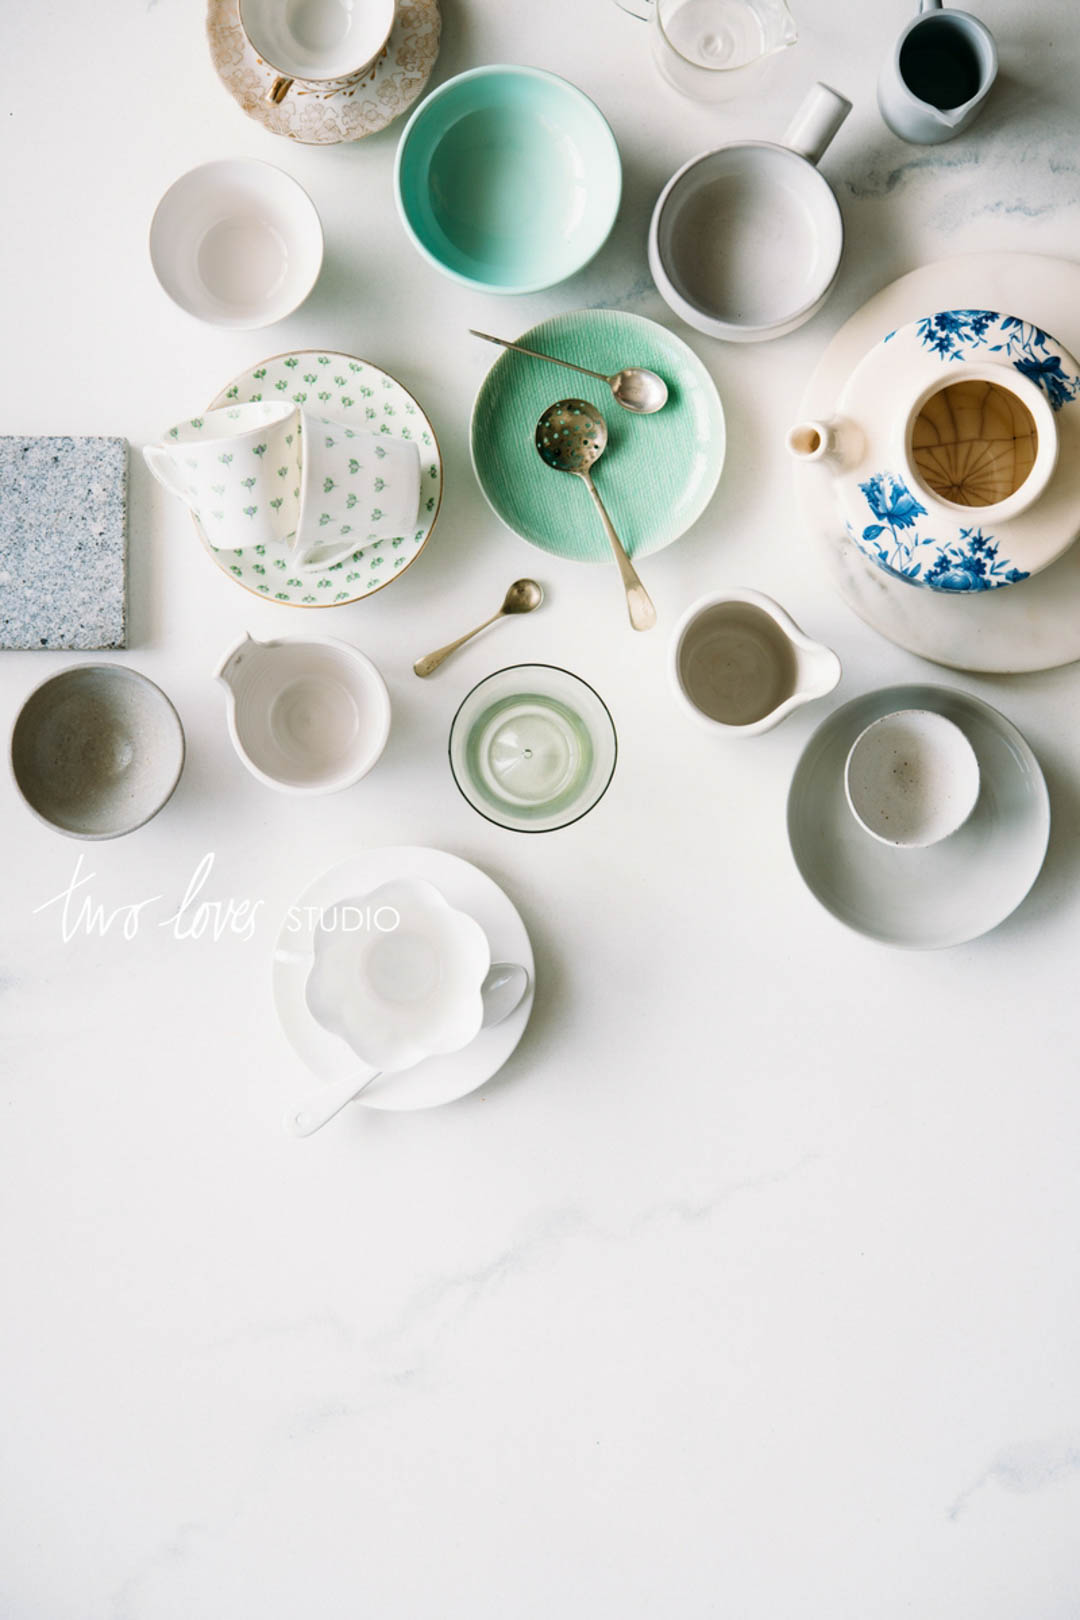 An assortment of tea cups, plates and spoons on a white backdrop.